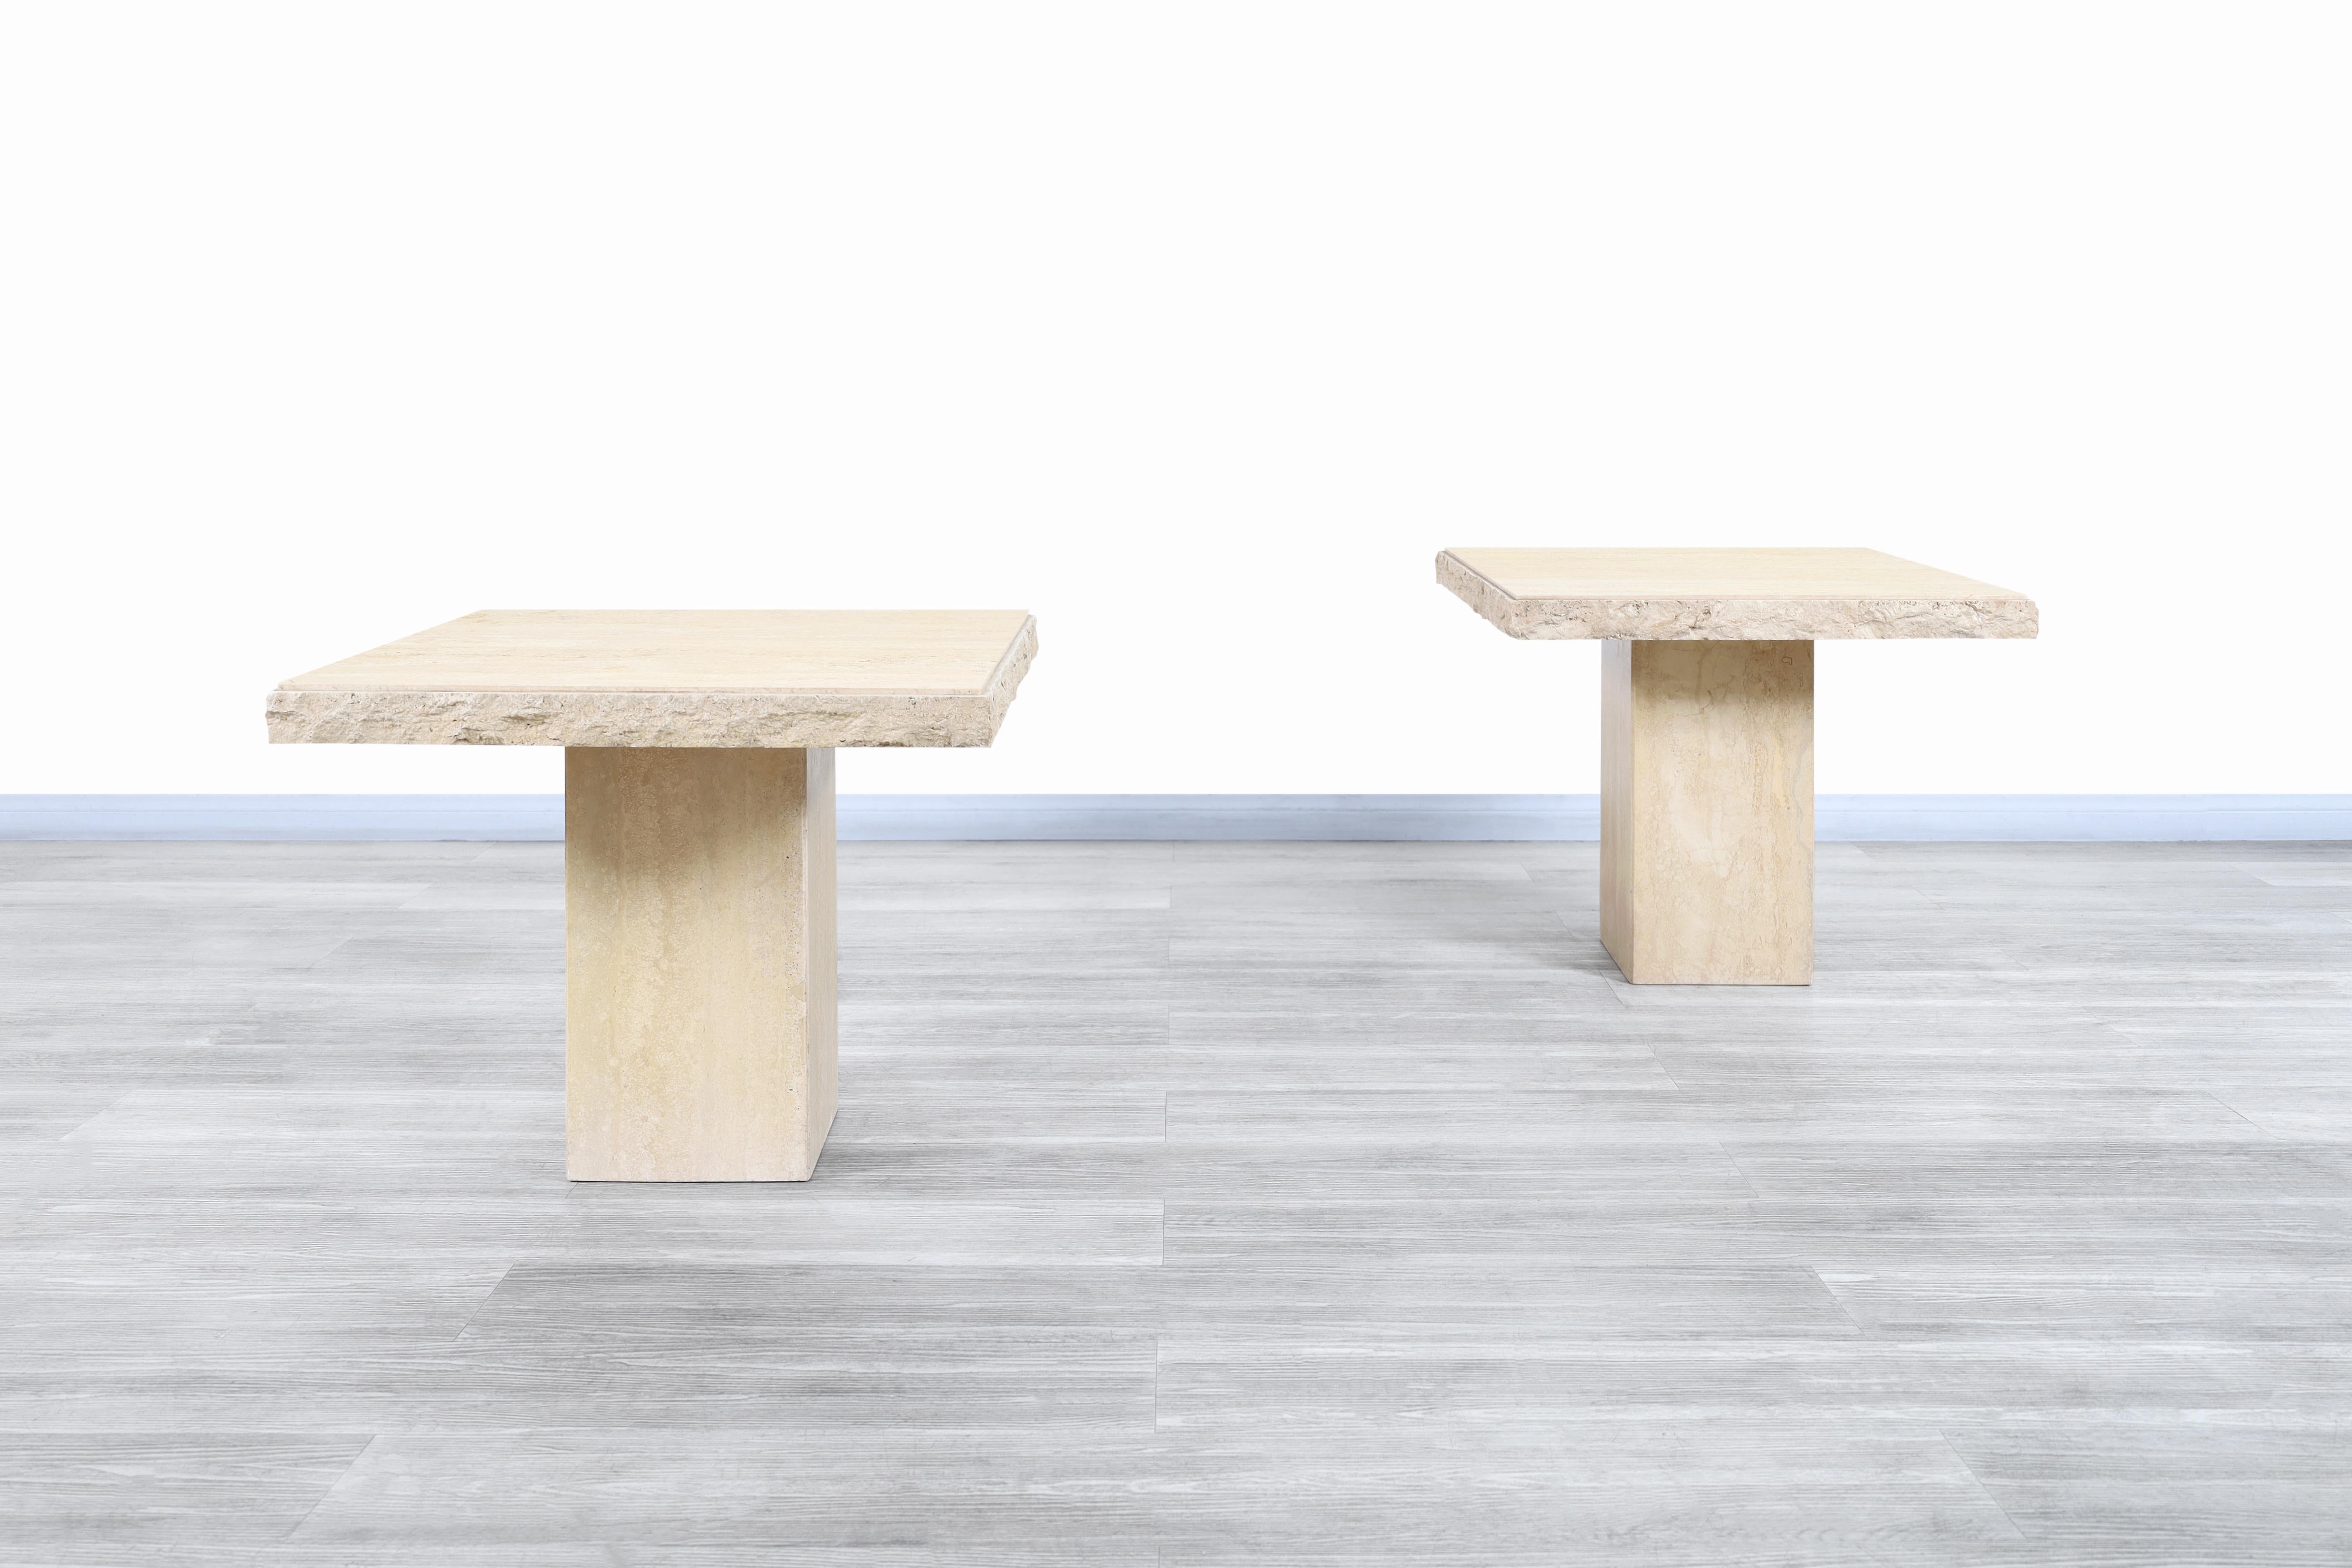 Fantastic vintage Italian live edge travertine side tables designed and manufactured in Italy, circa 1970s. The combination of the natural minerals that make up the travertine stone flows beautifully through the entire table. The tables feature a